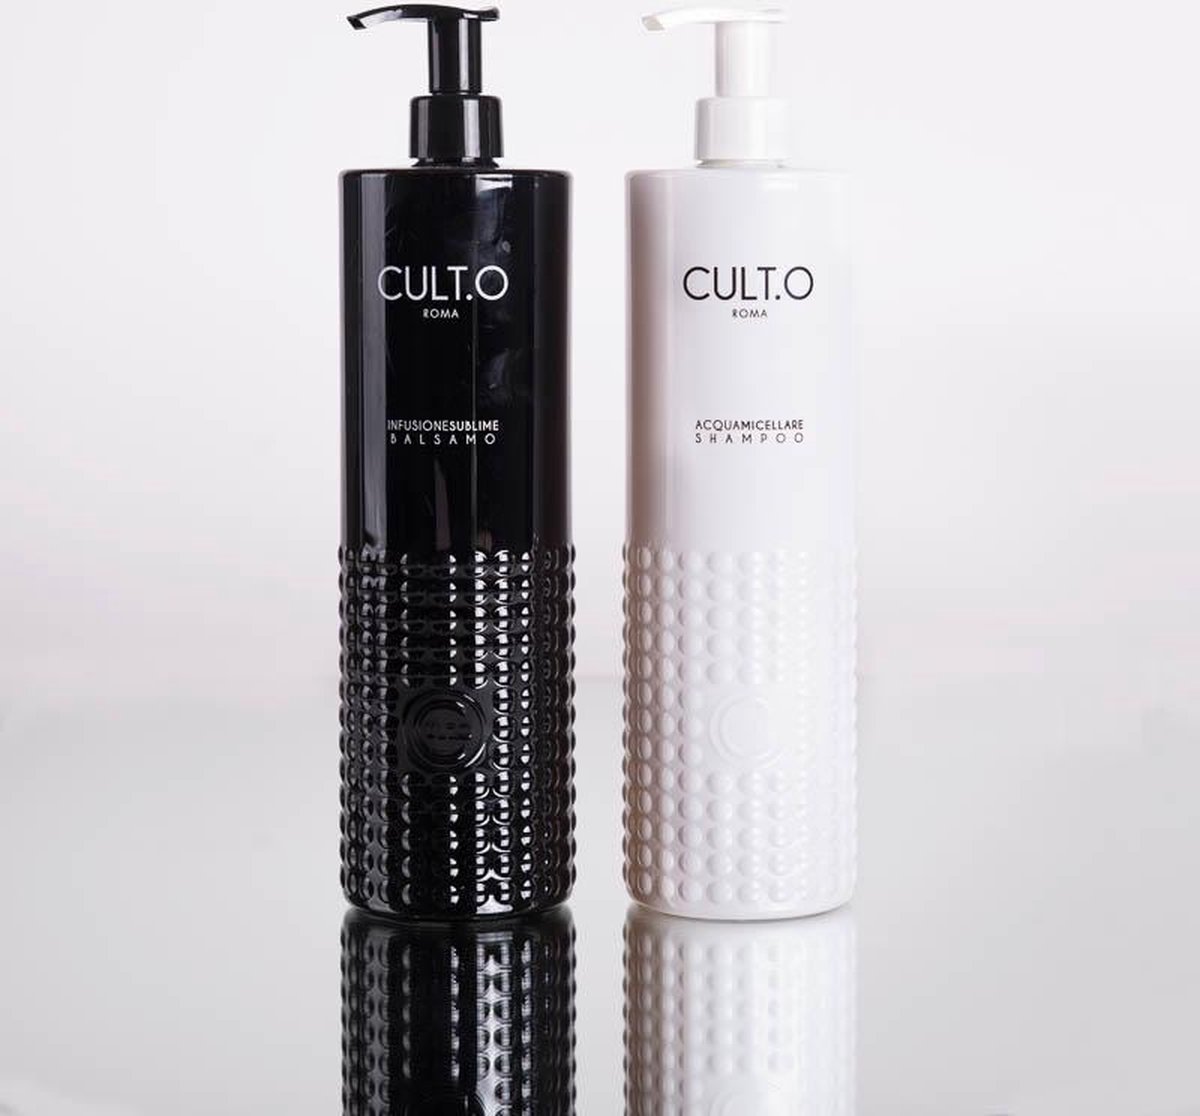 Cult.O Roma Sublime infusion conditioner